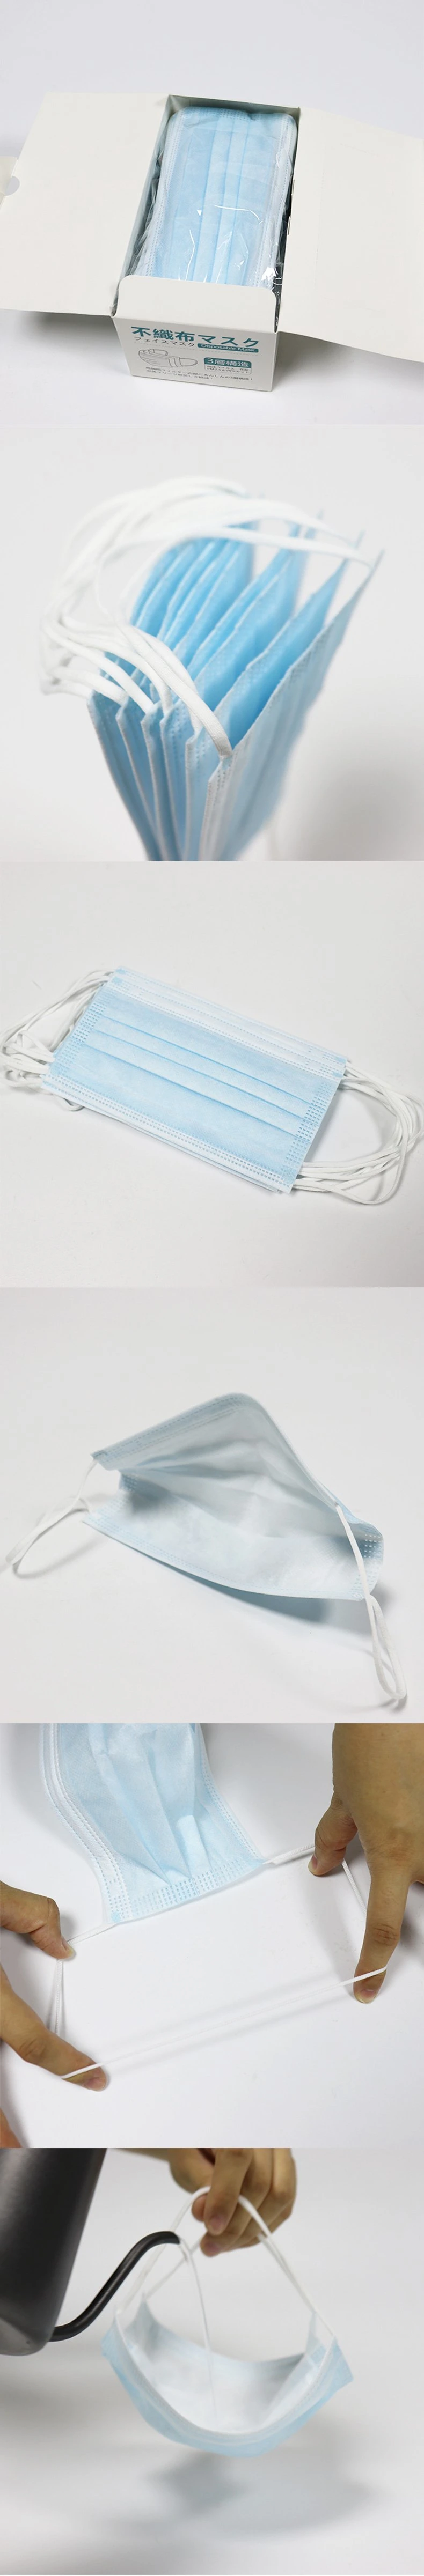 in Stock Disposable Protective Nonwoven Folding Half Face Mask for Self Use with Disposable Masks Factory